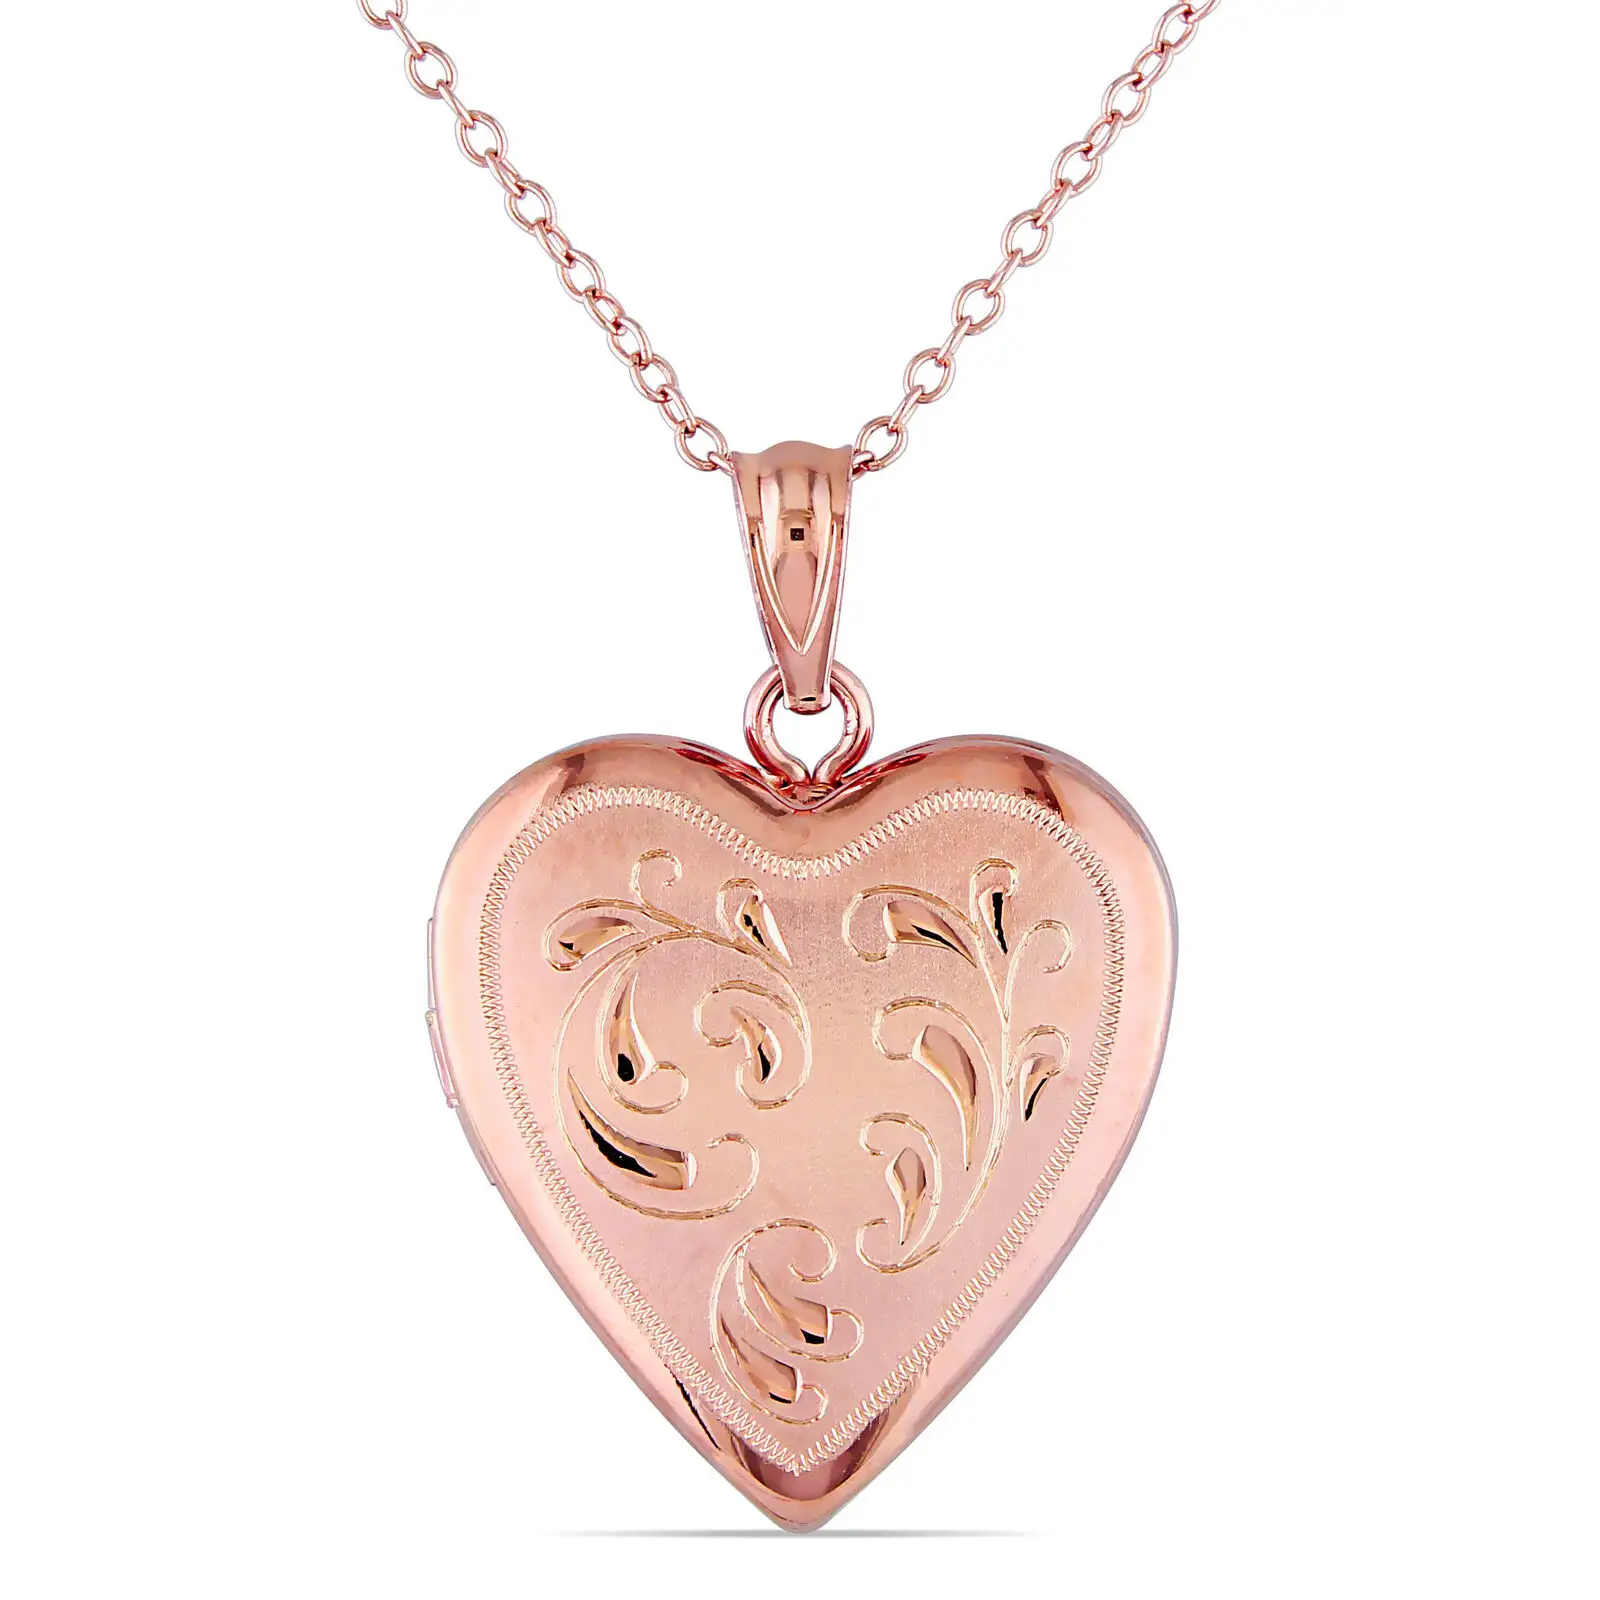 Exquisite Carving Pattern 925 Sterling Silver Rose Gold Heart Picture Locket Necklace Manufacturer Factory Jewelry Pendant